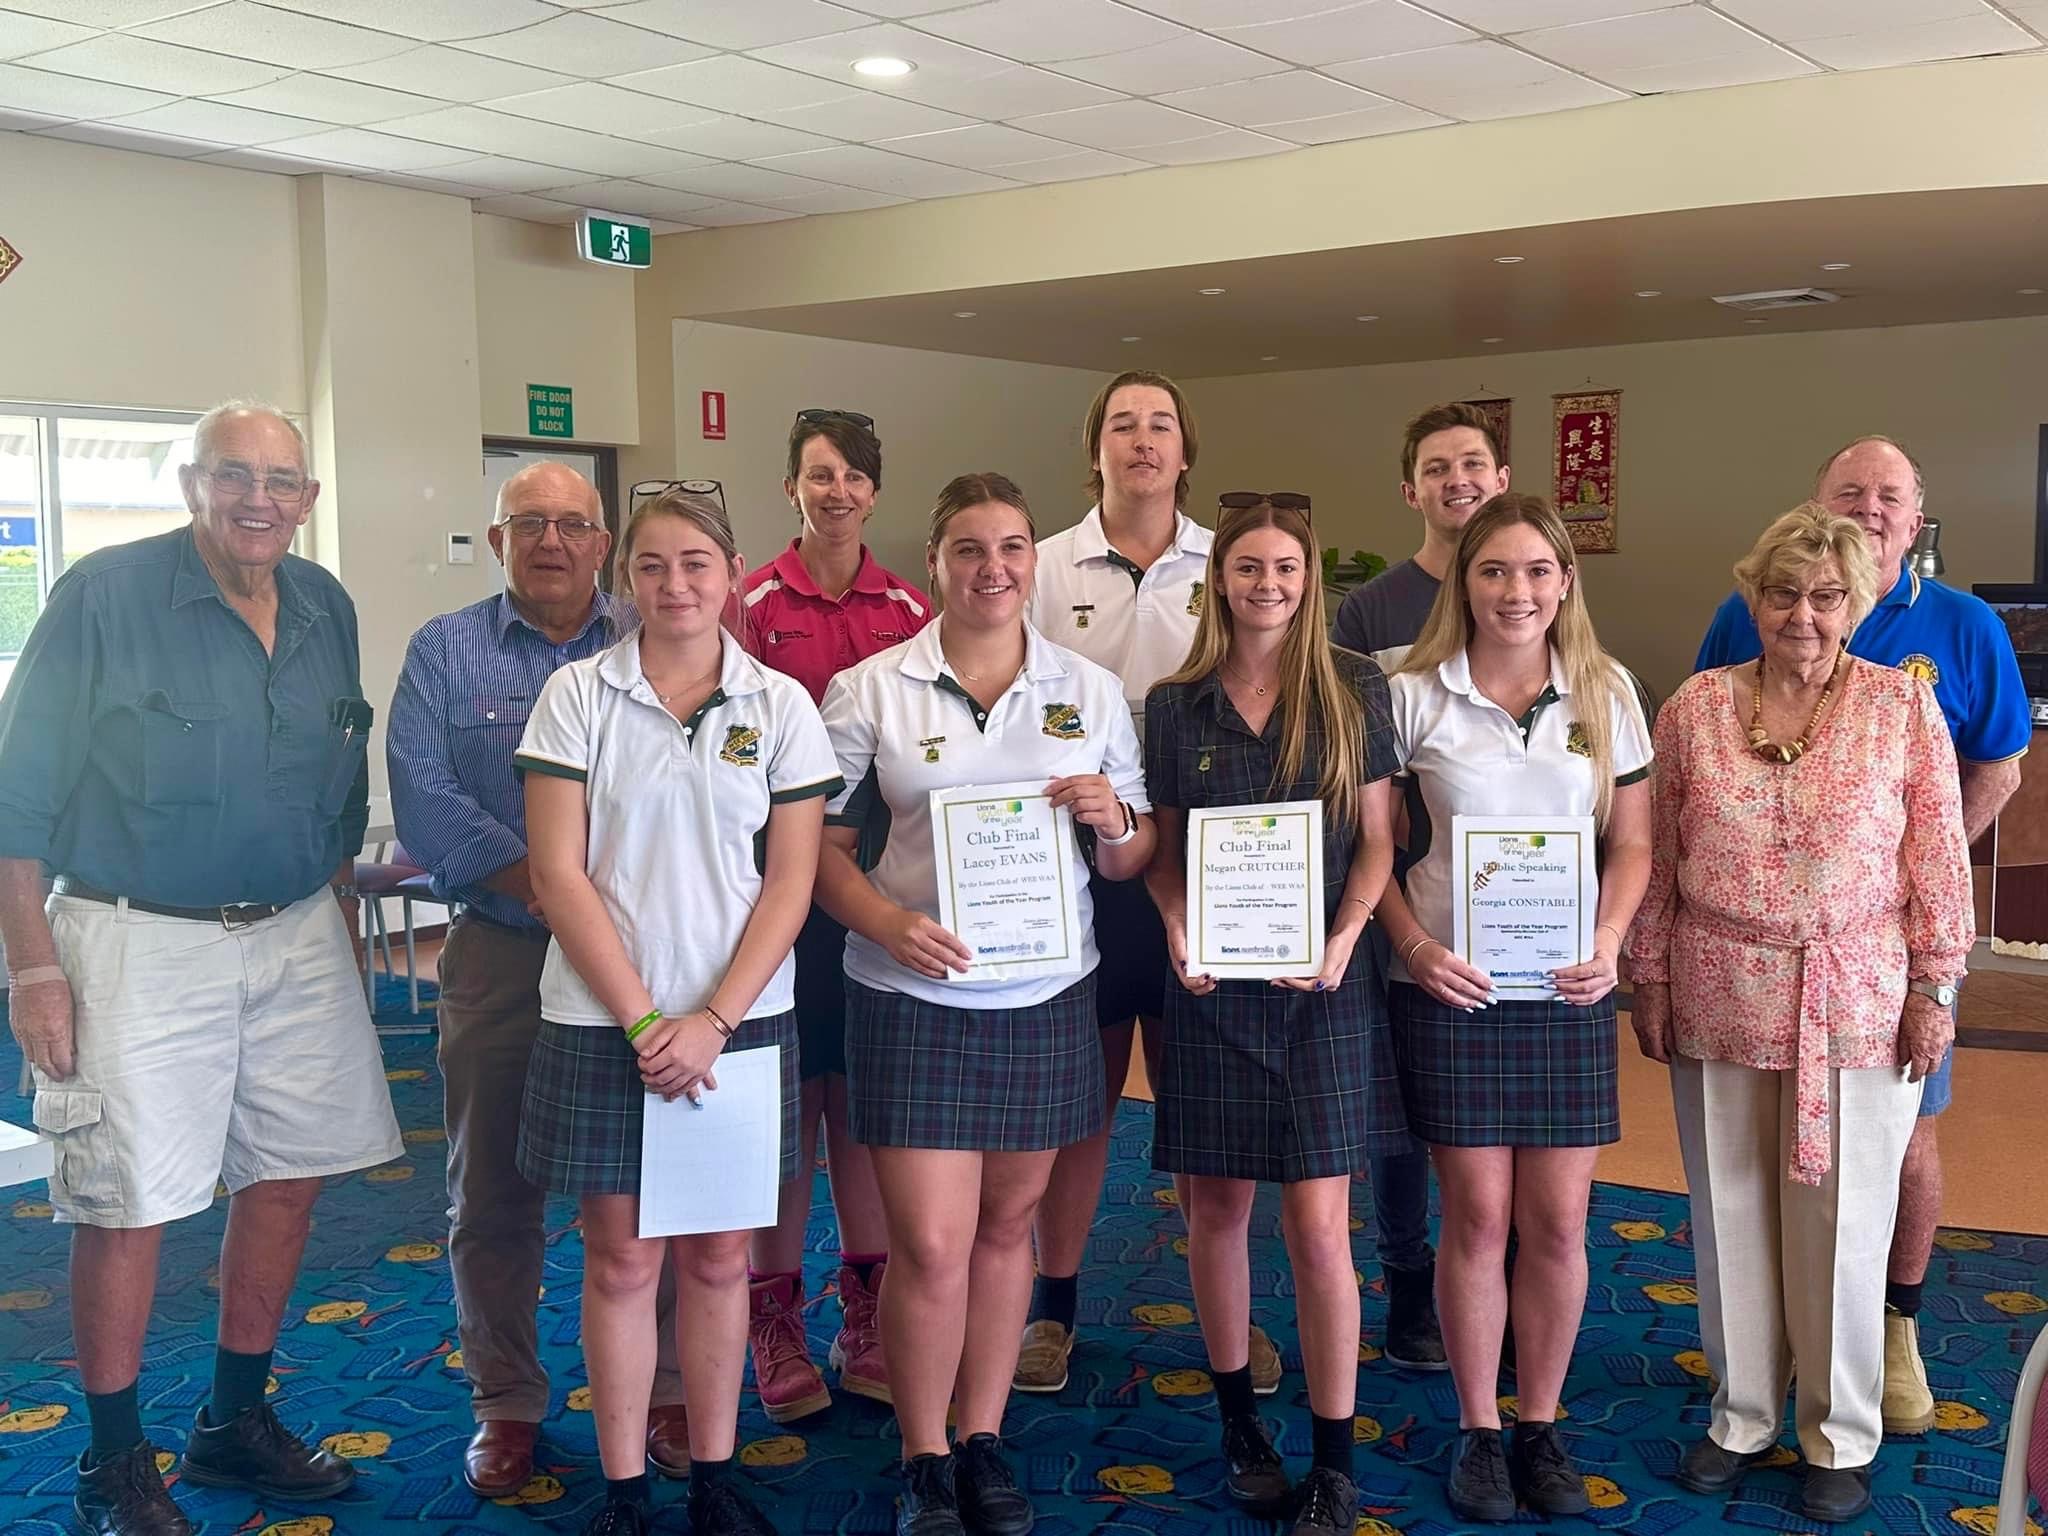 Pride of the Lions club: Wee Waa youth program a roaring success again